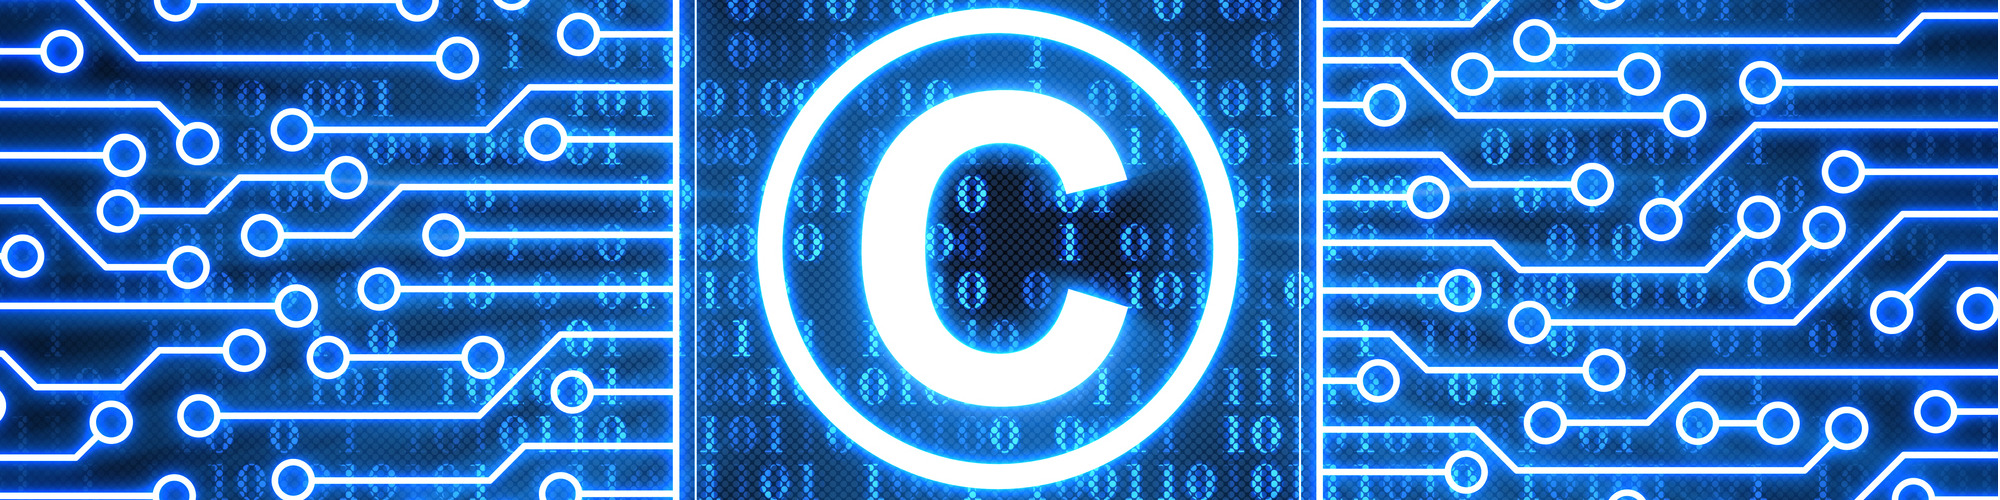 IP Improvements in Technology Licensing Arrangements - The Key Issues